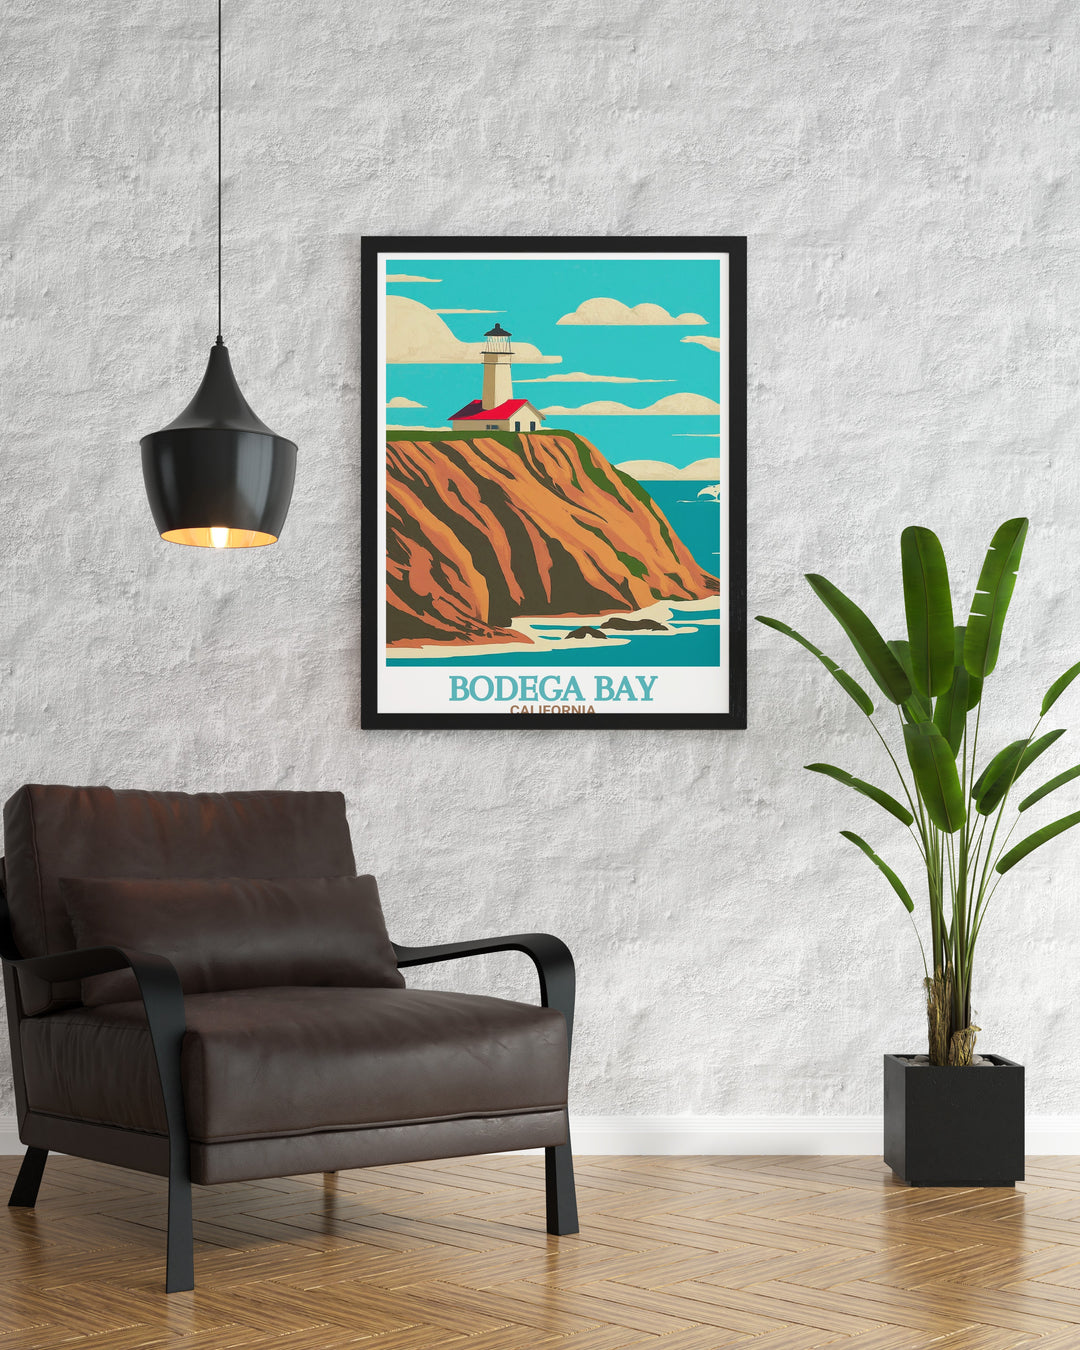 Bodega Head map print offering a unique and artistic representation of the Bodega Bay area. This piece is great for adding a nautical touch to your decor and celebrating your love for California travel.